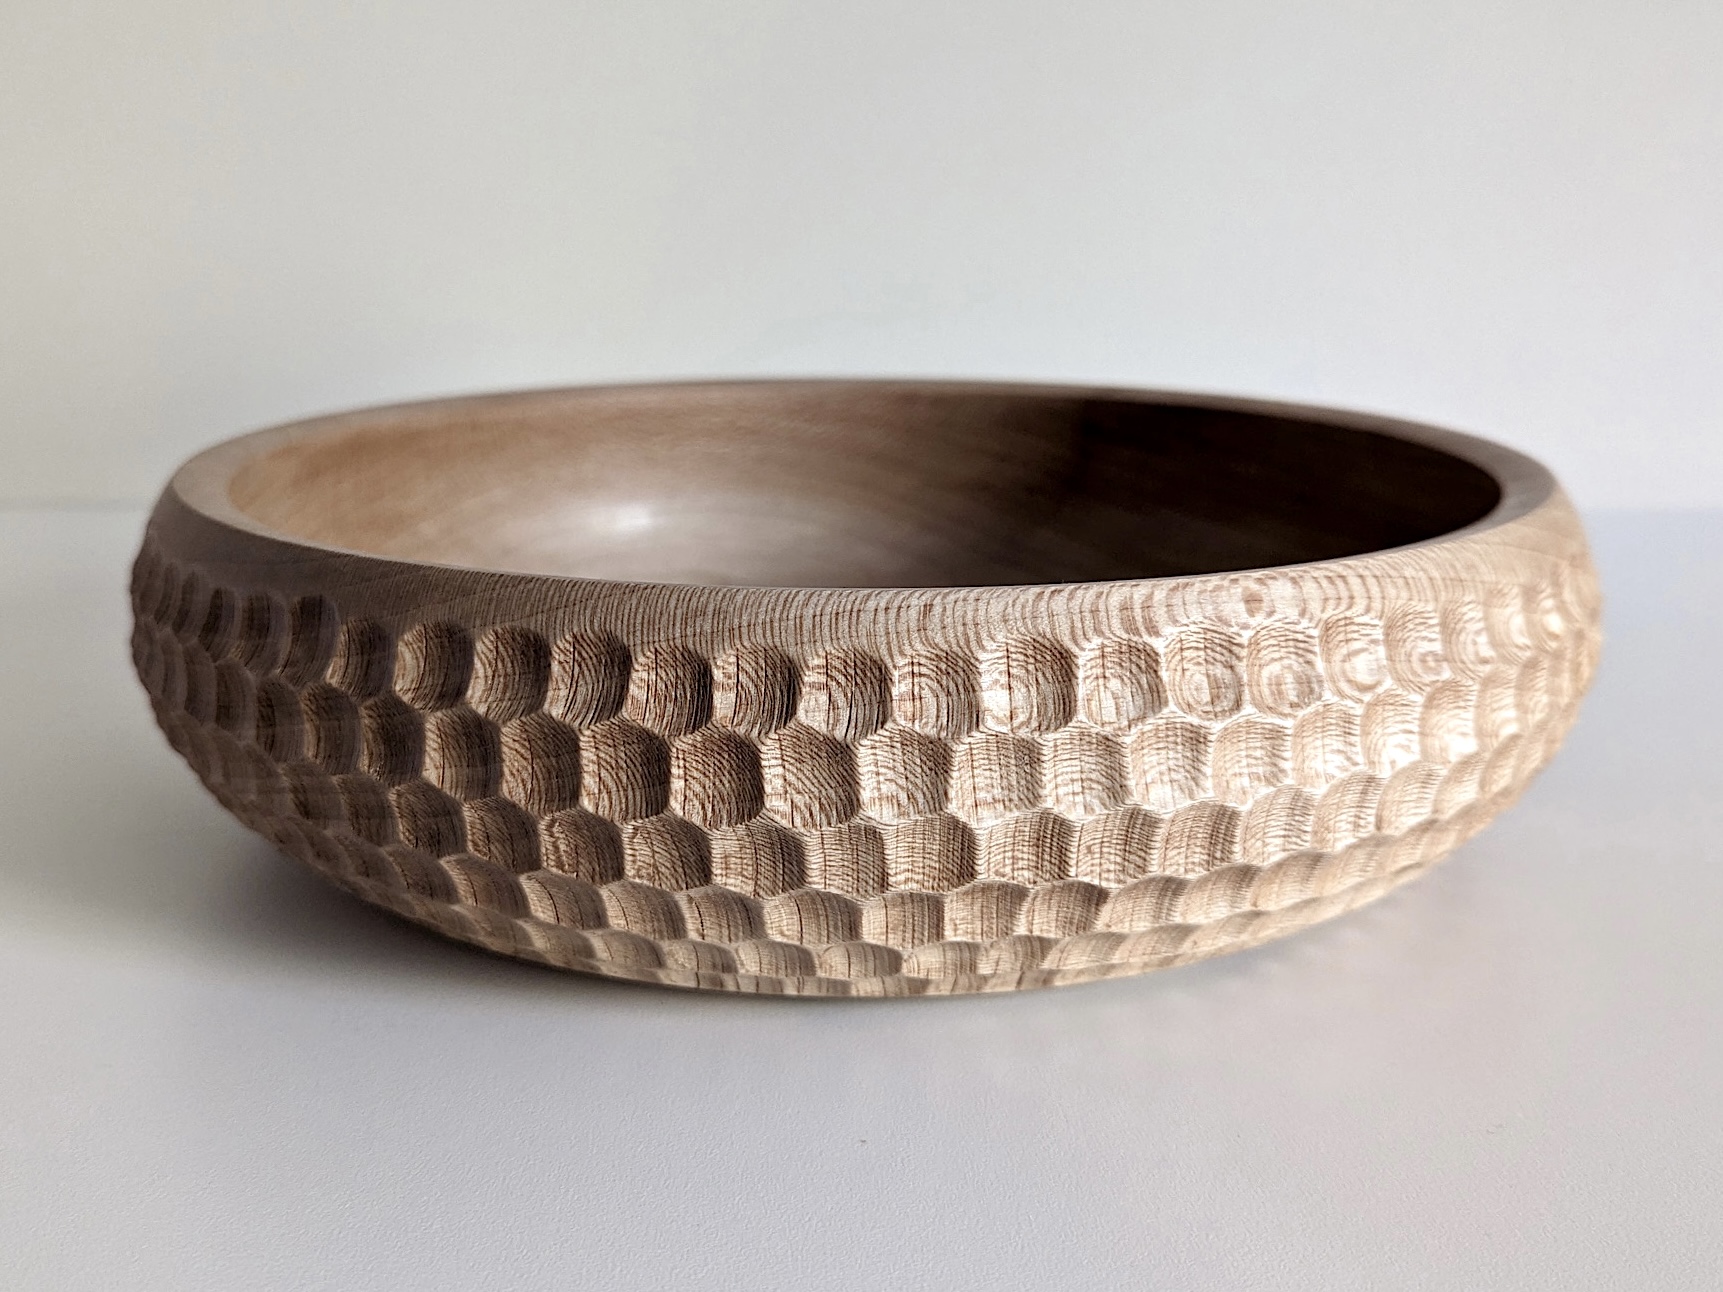 Textured sycamore bowl